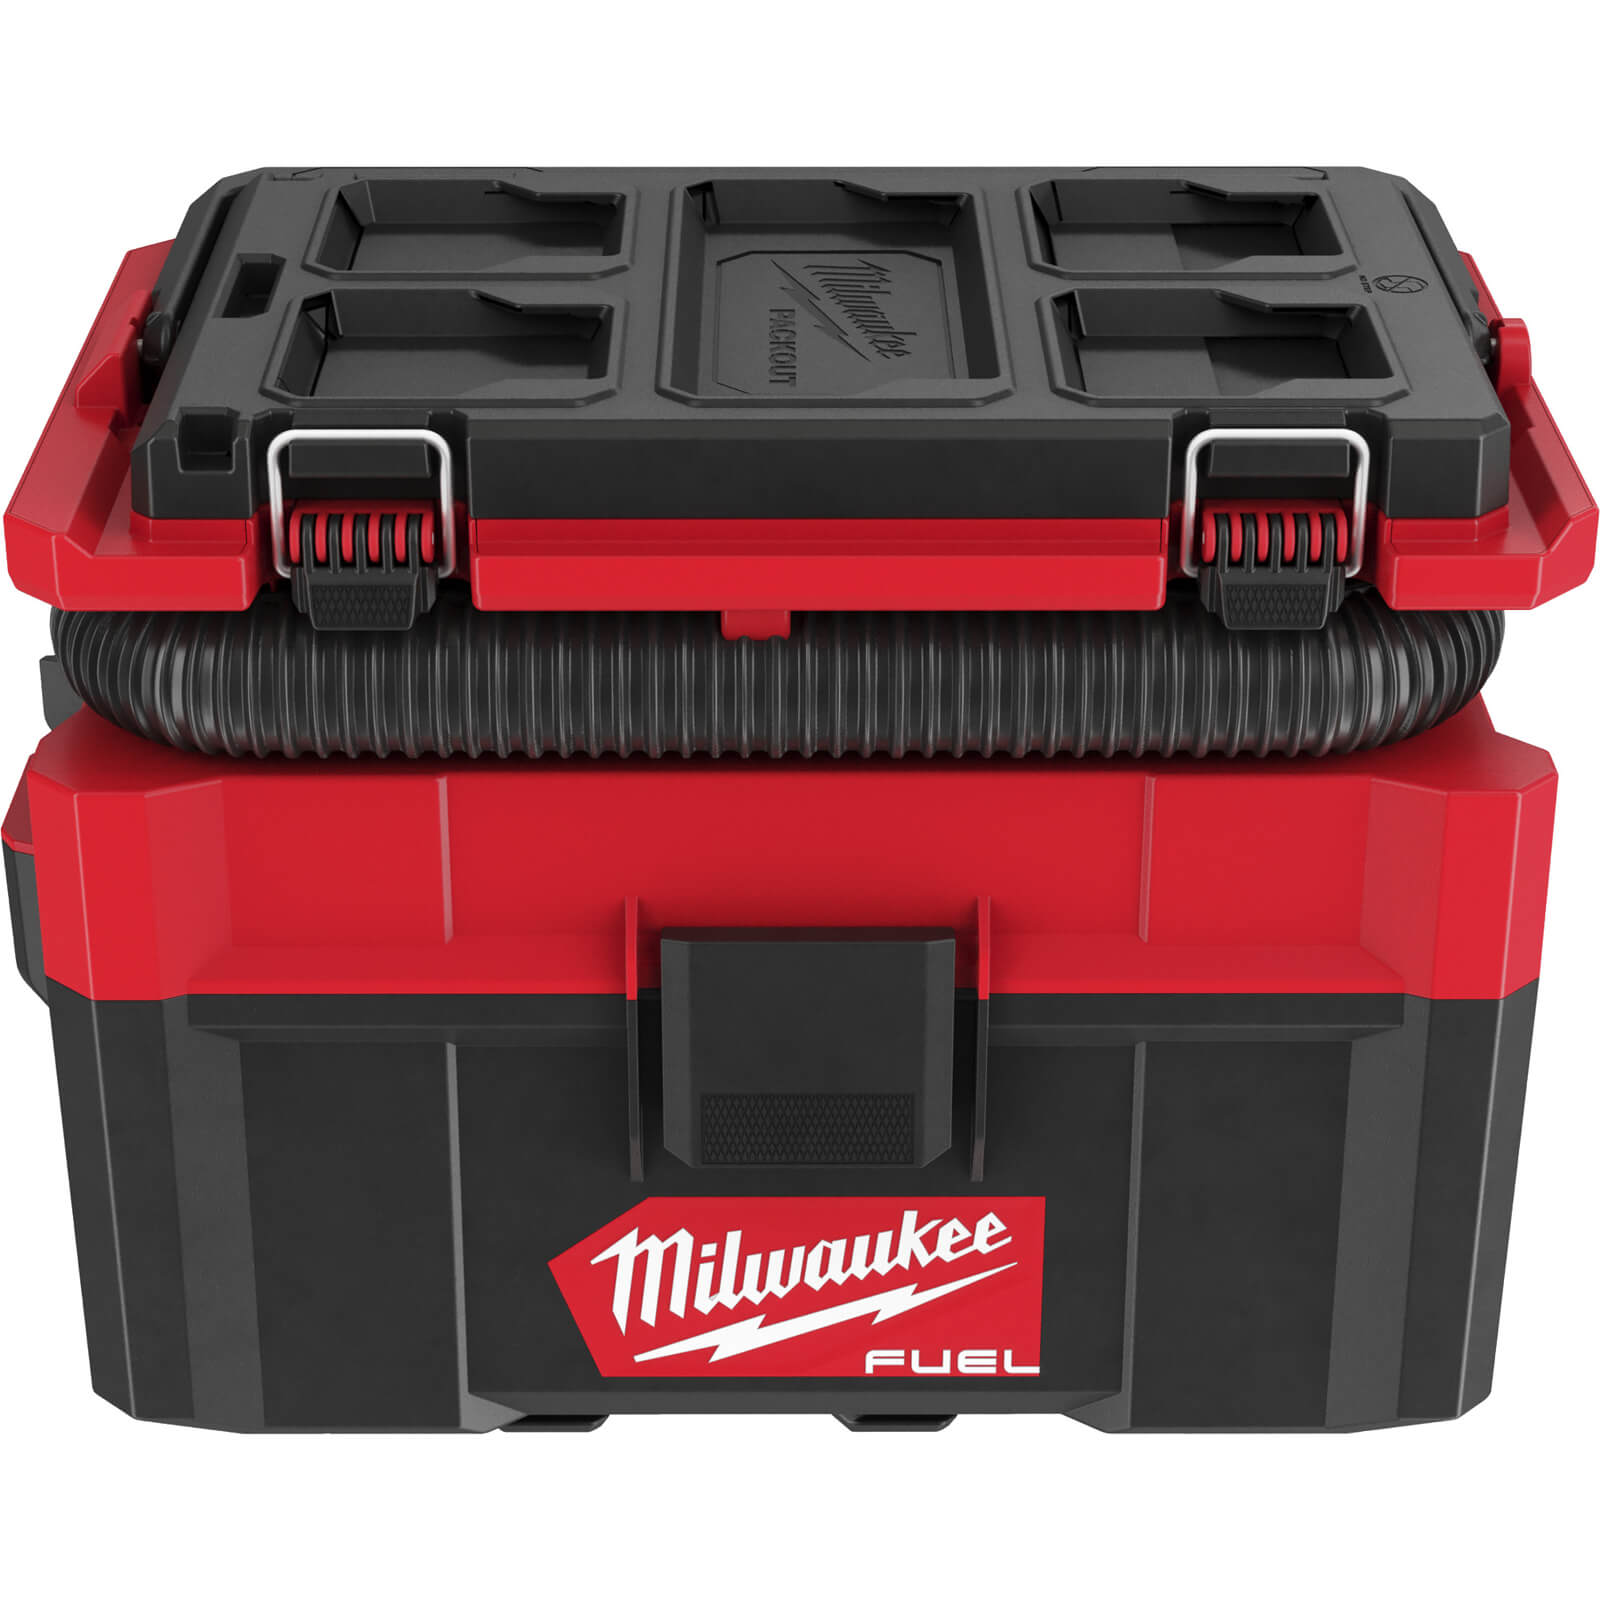 Image of Milwaukee M18 FPOVCL Fuel 18v Cordless Brushless Packout Vacuum Cleaner No Batteries No Charger No Case